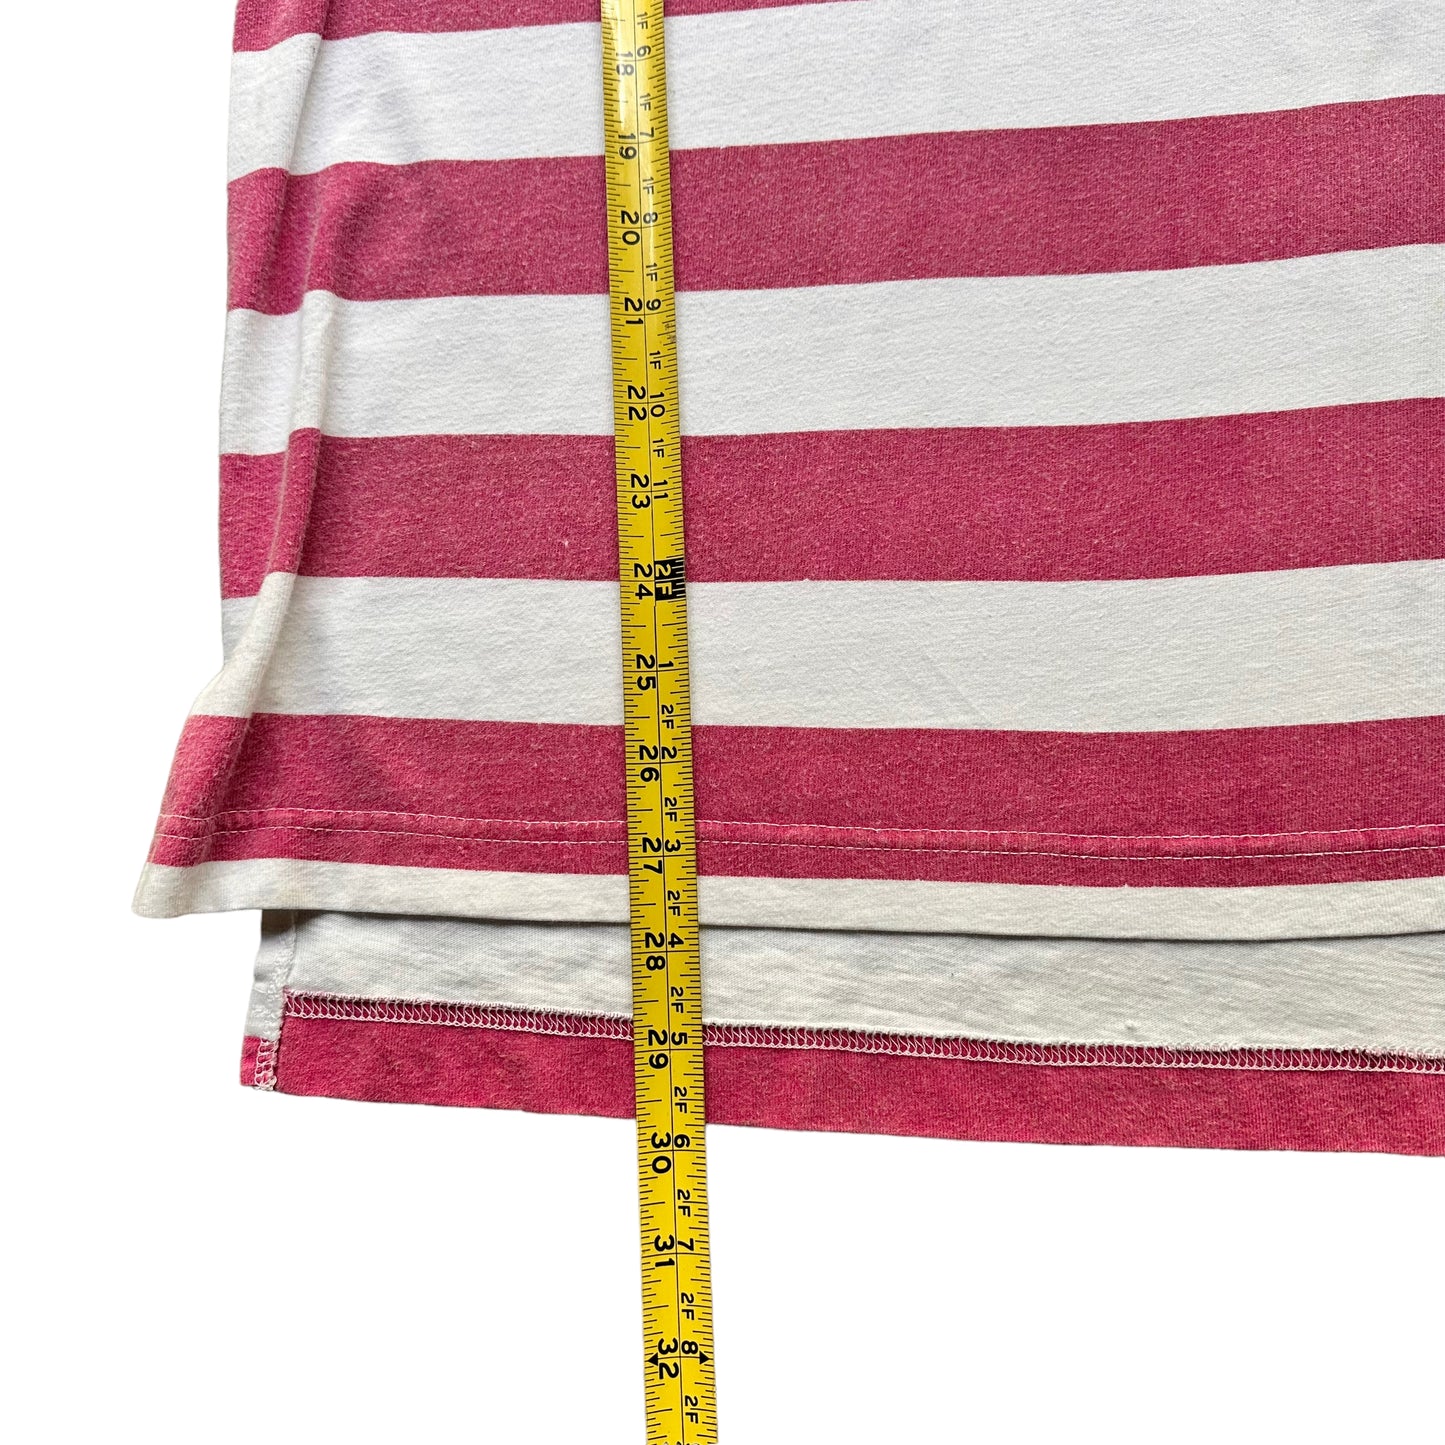 90s Gap striped hooded tee - Large & Extra Large